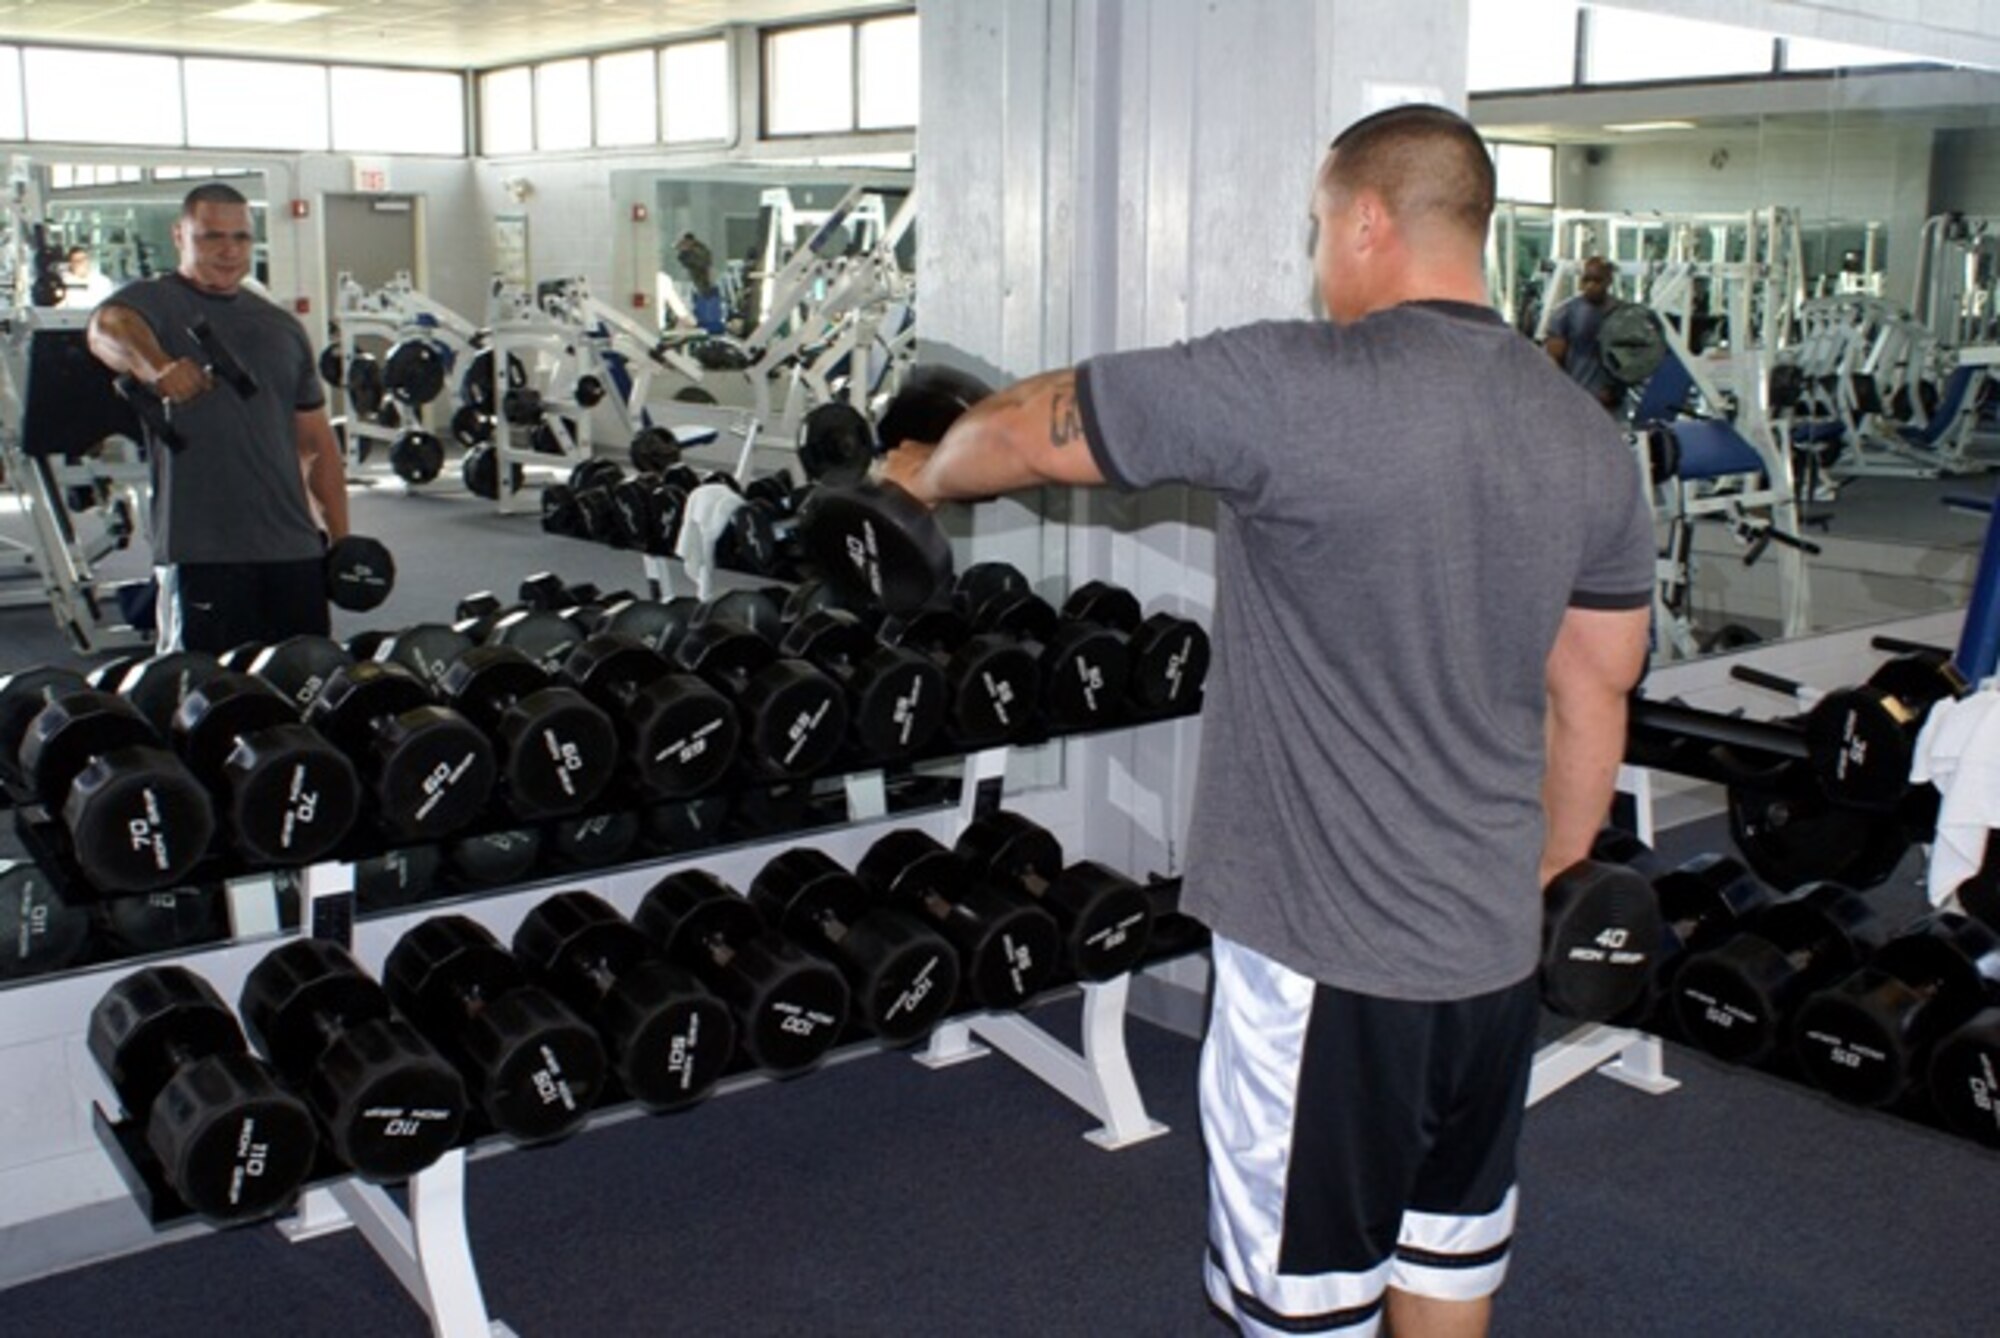 Mr. Carlos Eyzaguirre, former 482nd Security Forces Squadron member, works out at the Homestead Sports and Fitness Center. The facility and its staff received the most prestigious distinction for a fitness center in the Air Force, a five-star rating for their services by the Air Force Services Agency. Homestead’s facility is one of 29 fitness centers in the Air Force to reach the enviable 5-star rating for 2007, and the first ever from the Air Force Reserve to receive this merit. (U.S. Air Force photo/Senior Airman Erik Hofmeyer)